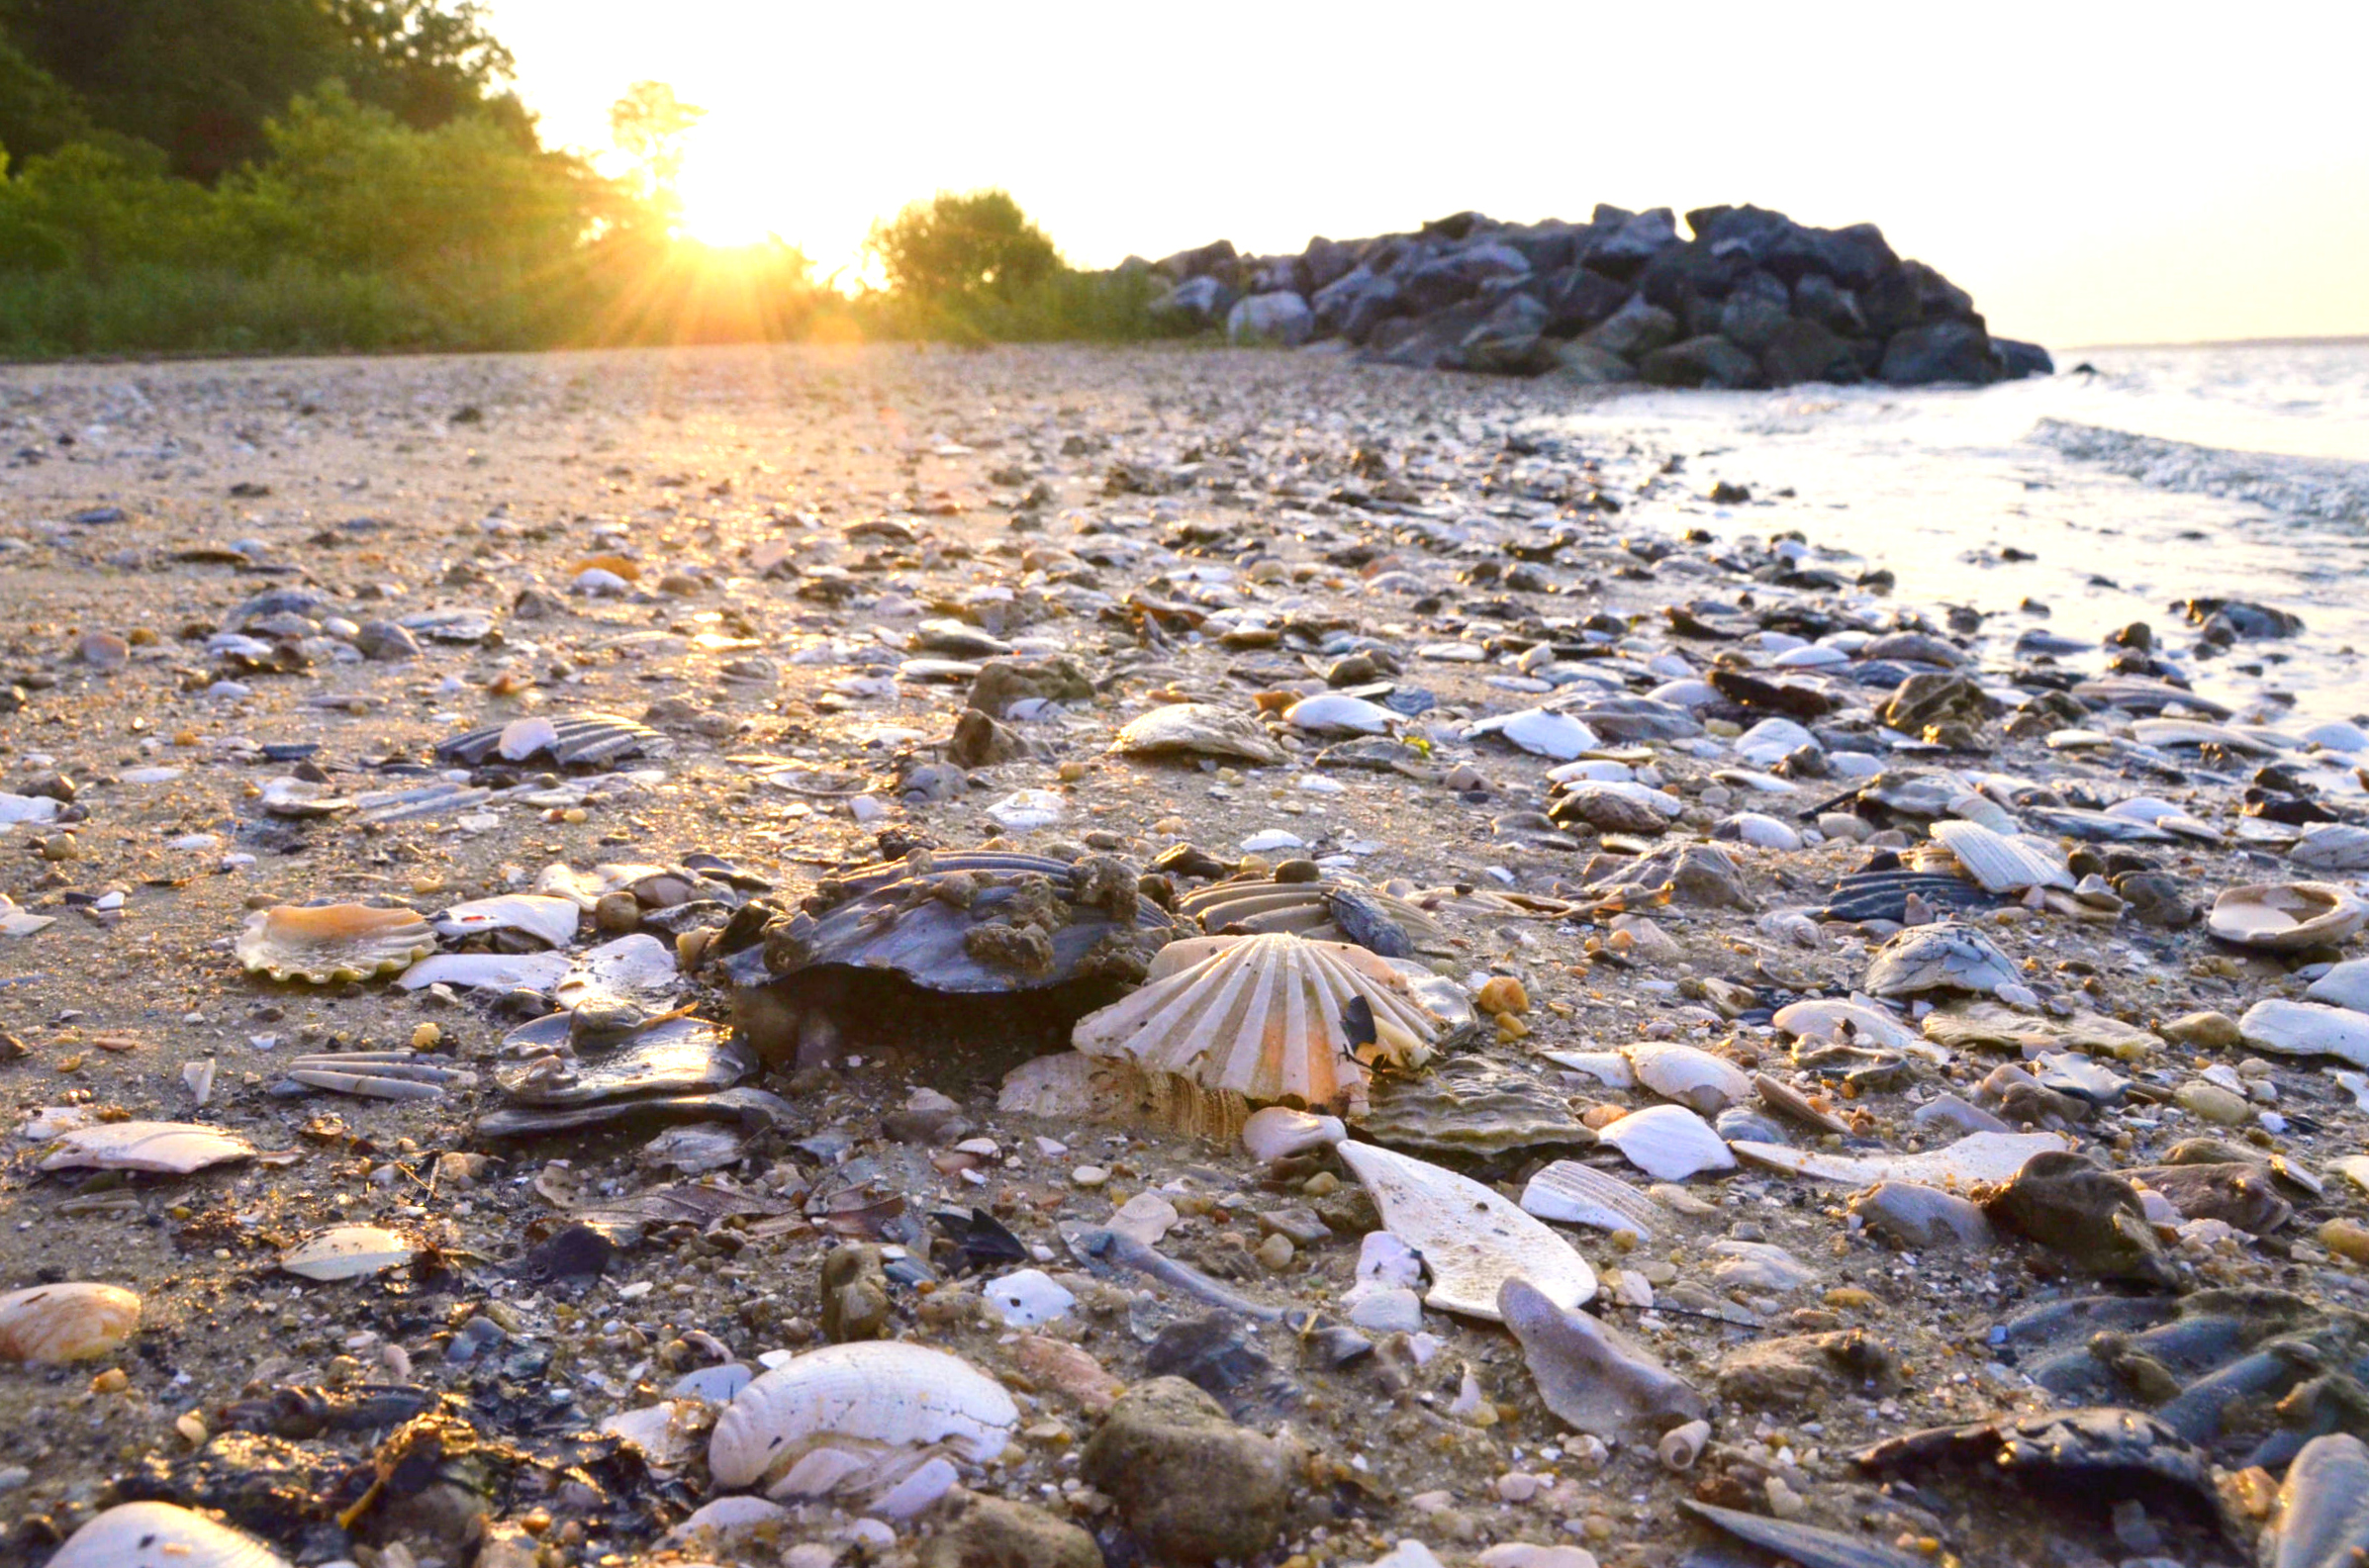 A beach at Chippokes State Park littered with fossils shells, mostly of Chesapecten jeffersonius. Located in Surry County, Virginia, Chippokes is famous for its abundance of fossil shells.